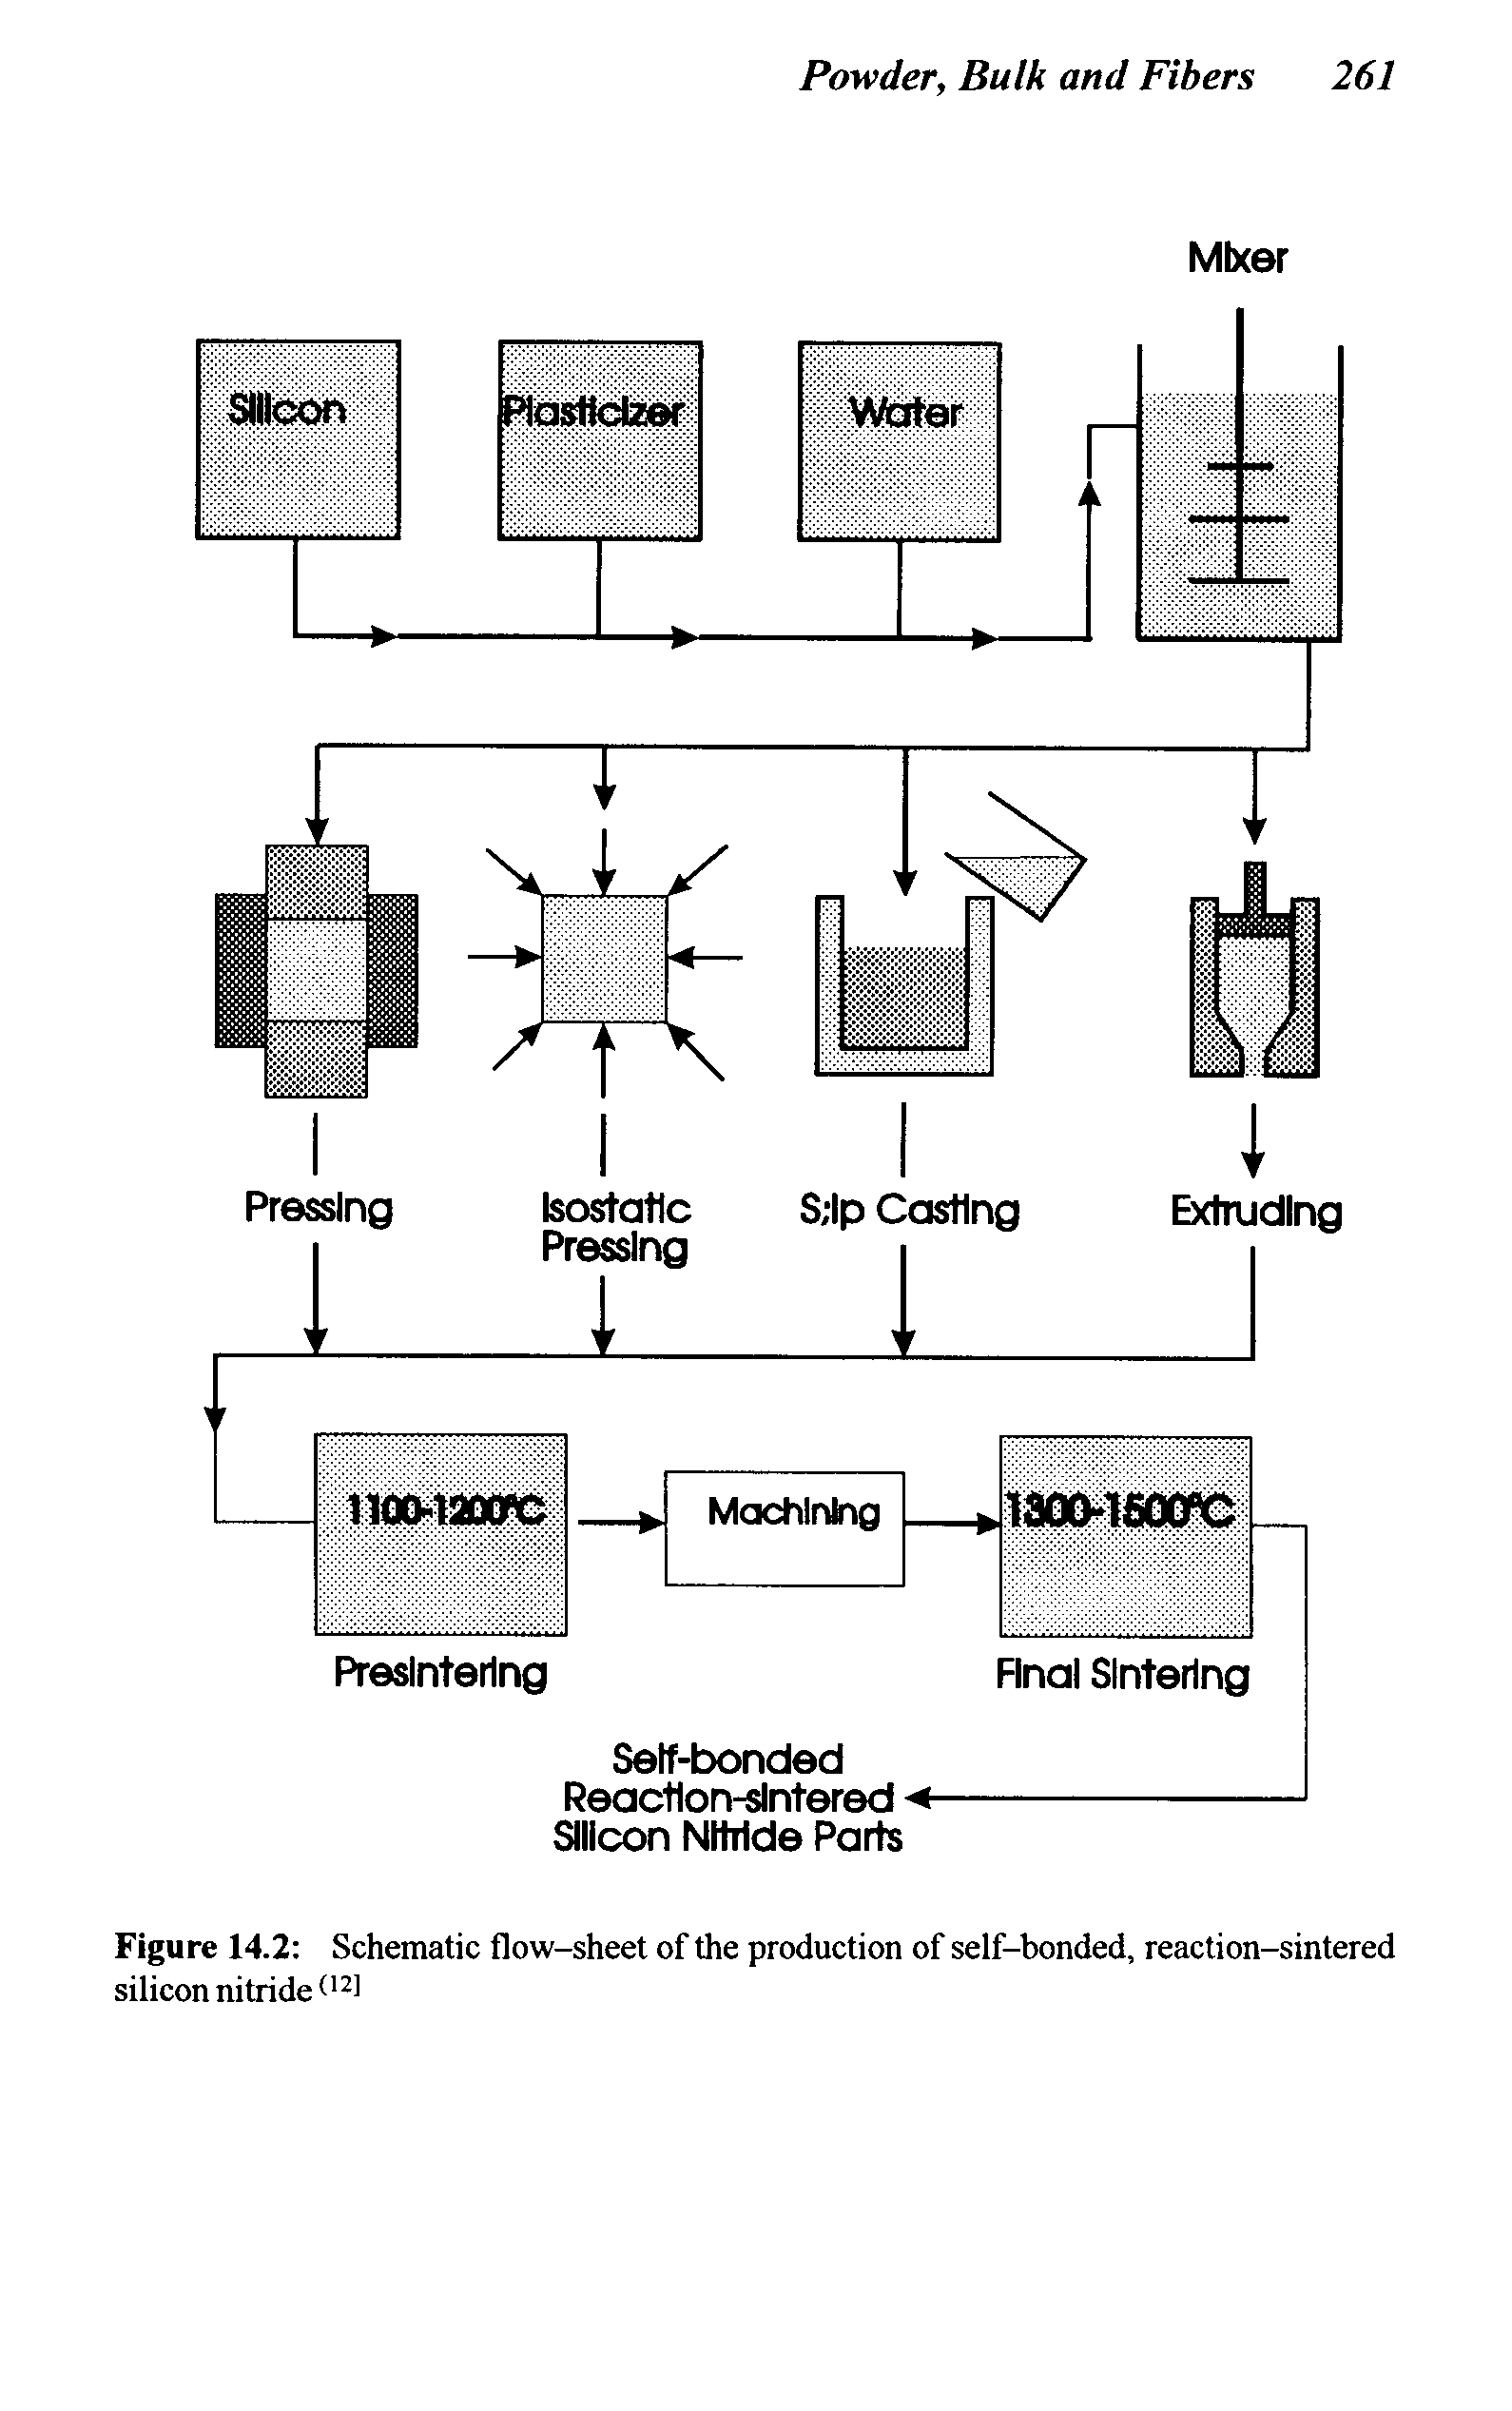 Figure 14.2 Schematic flow-sheet of the production of self-bonded, reaction-sintered silicon nitride...